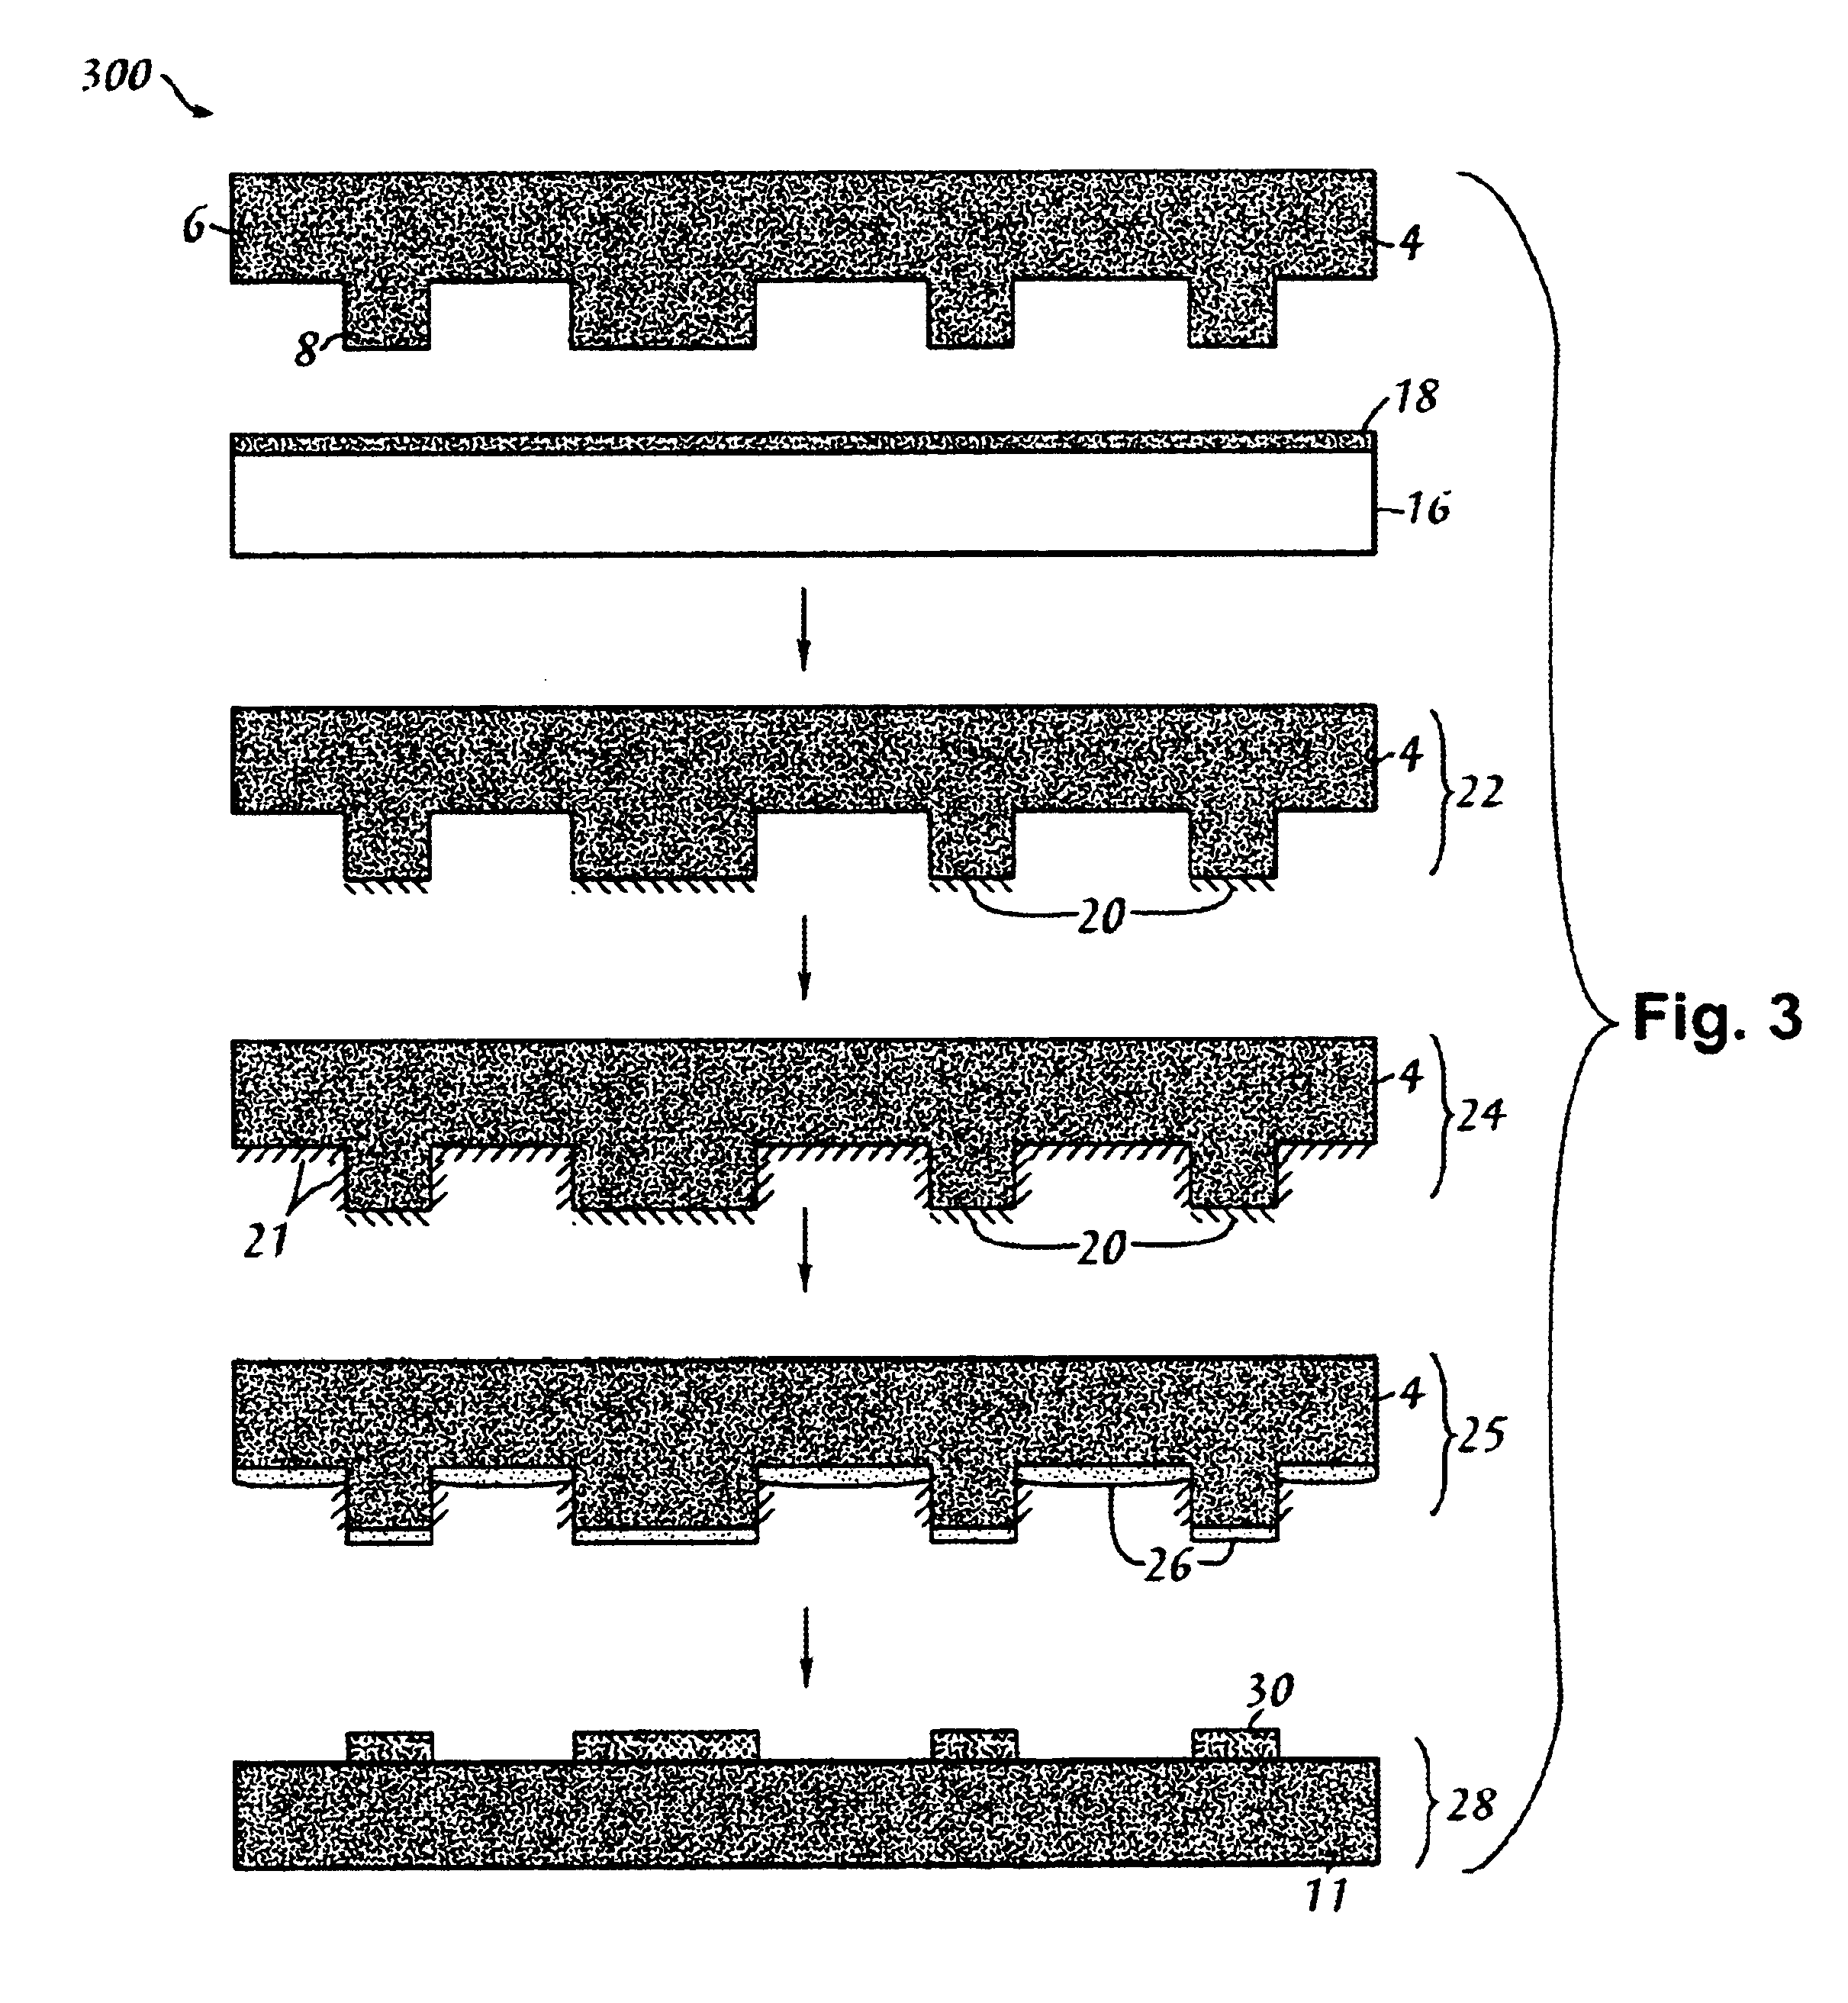 Methods of creating patterns on substrates and articles of manufacture resulting therefrom